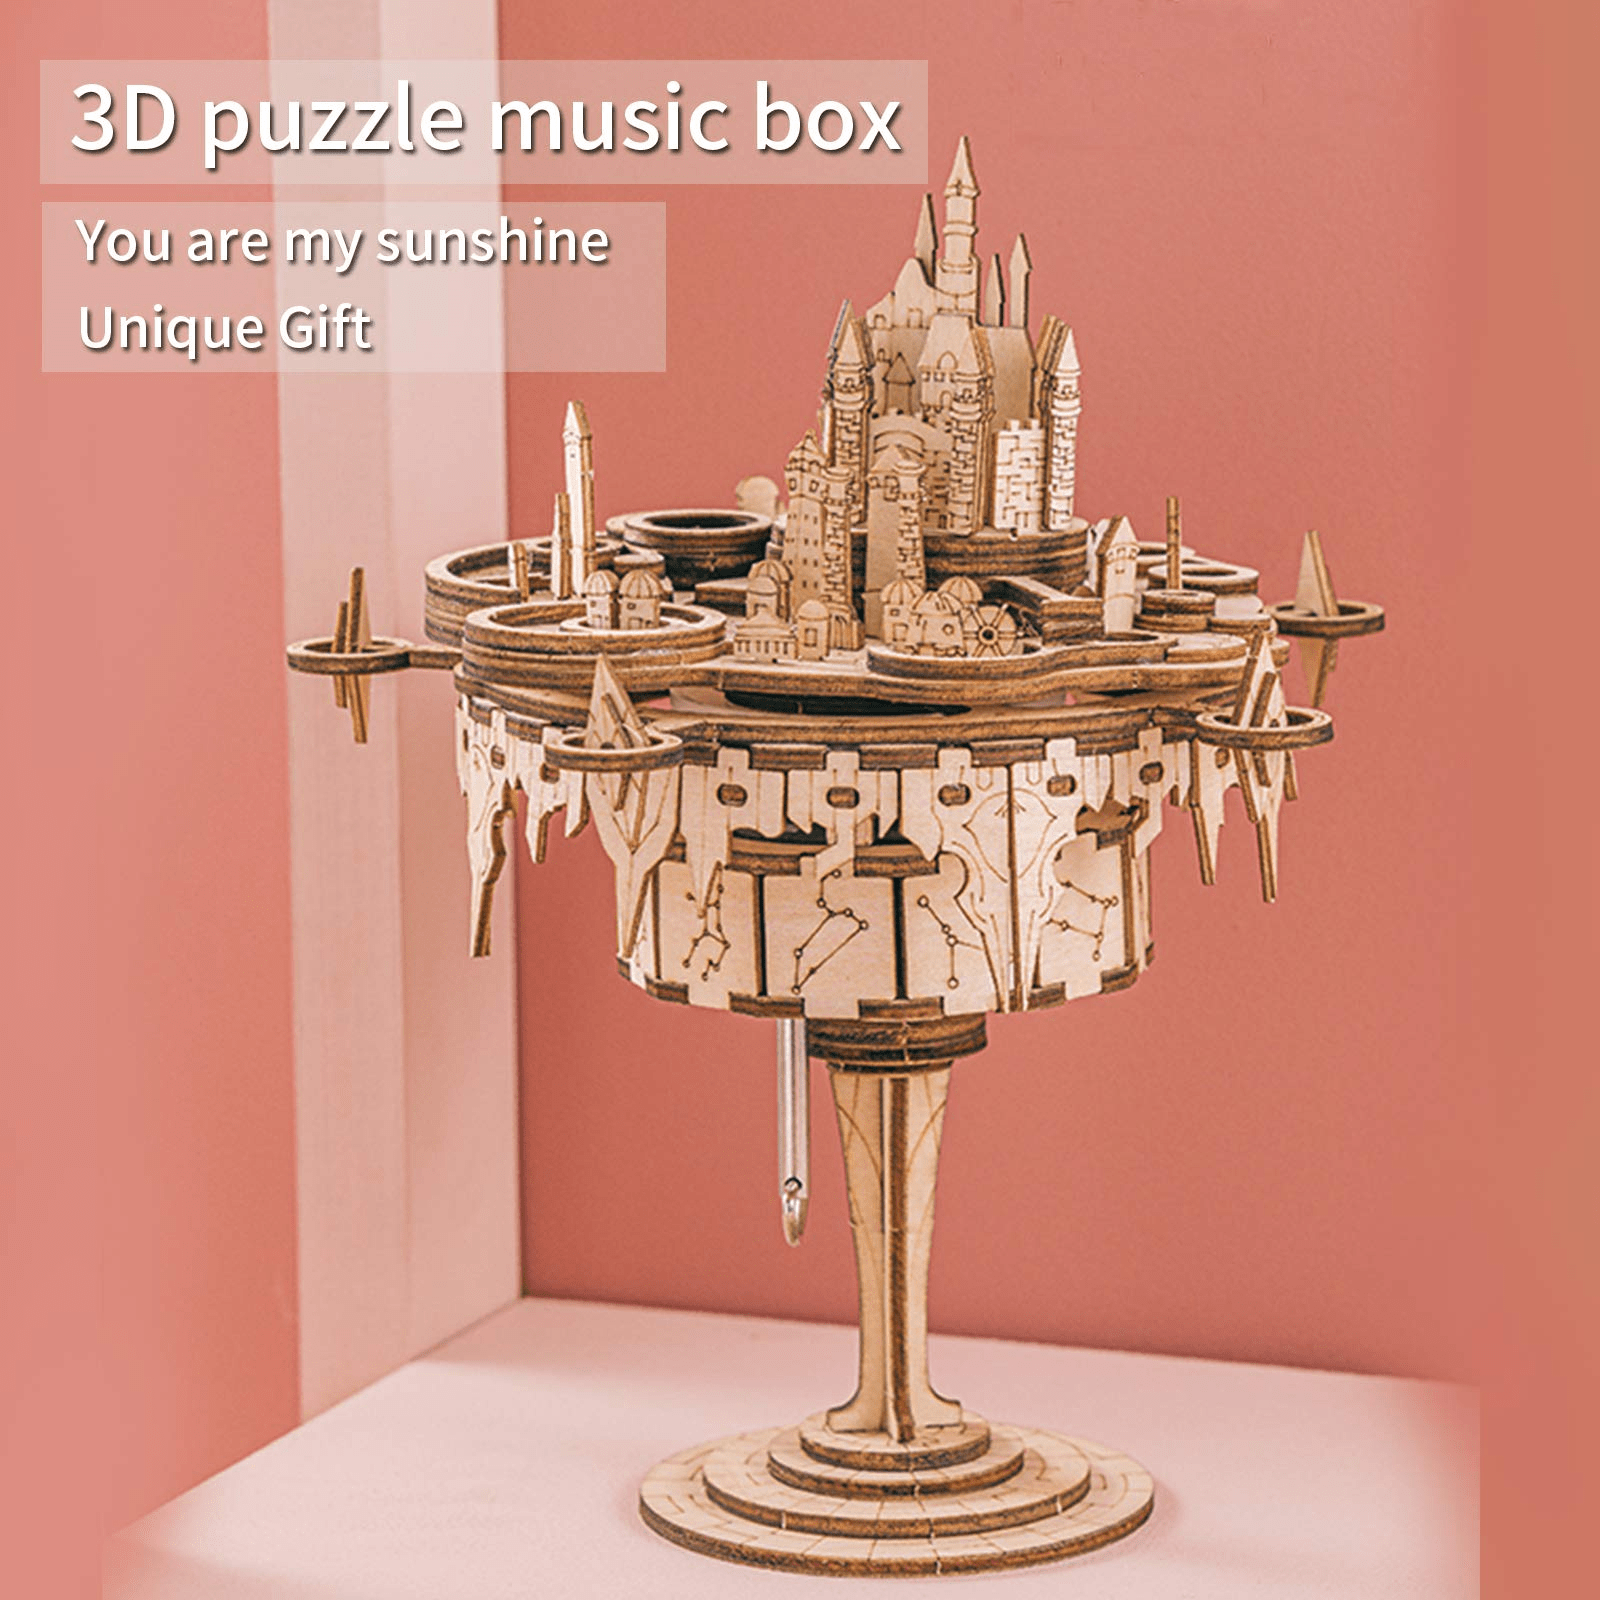 

3d Wooden Puzzles Music Box Kits You Are My Sunshine Castle Building Model Diy Crafts Birthday Gift For Girls Or Women Age 14